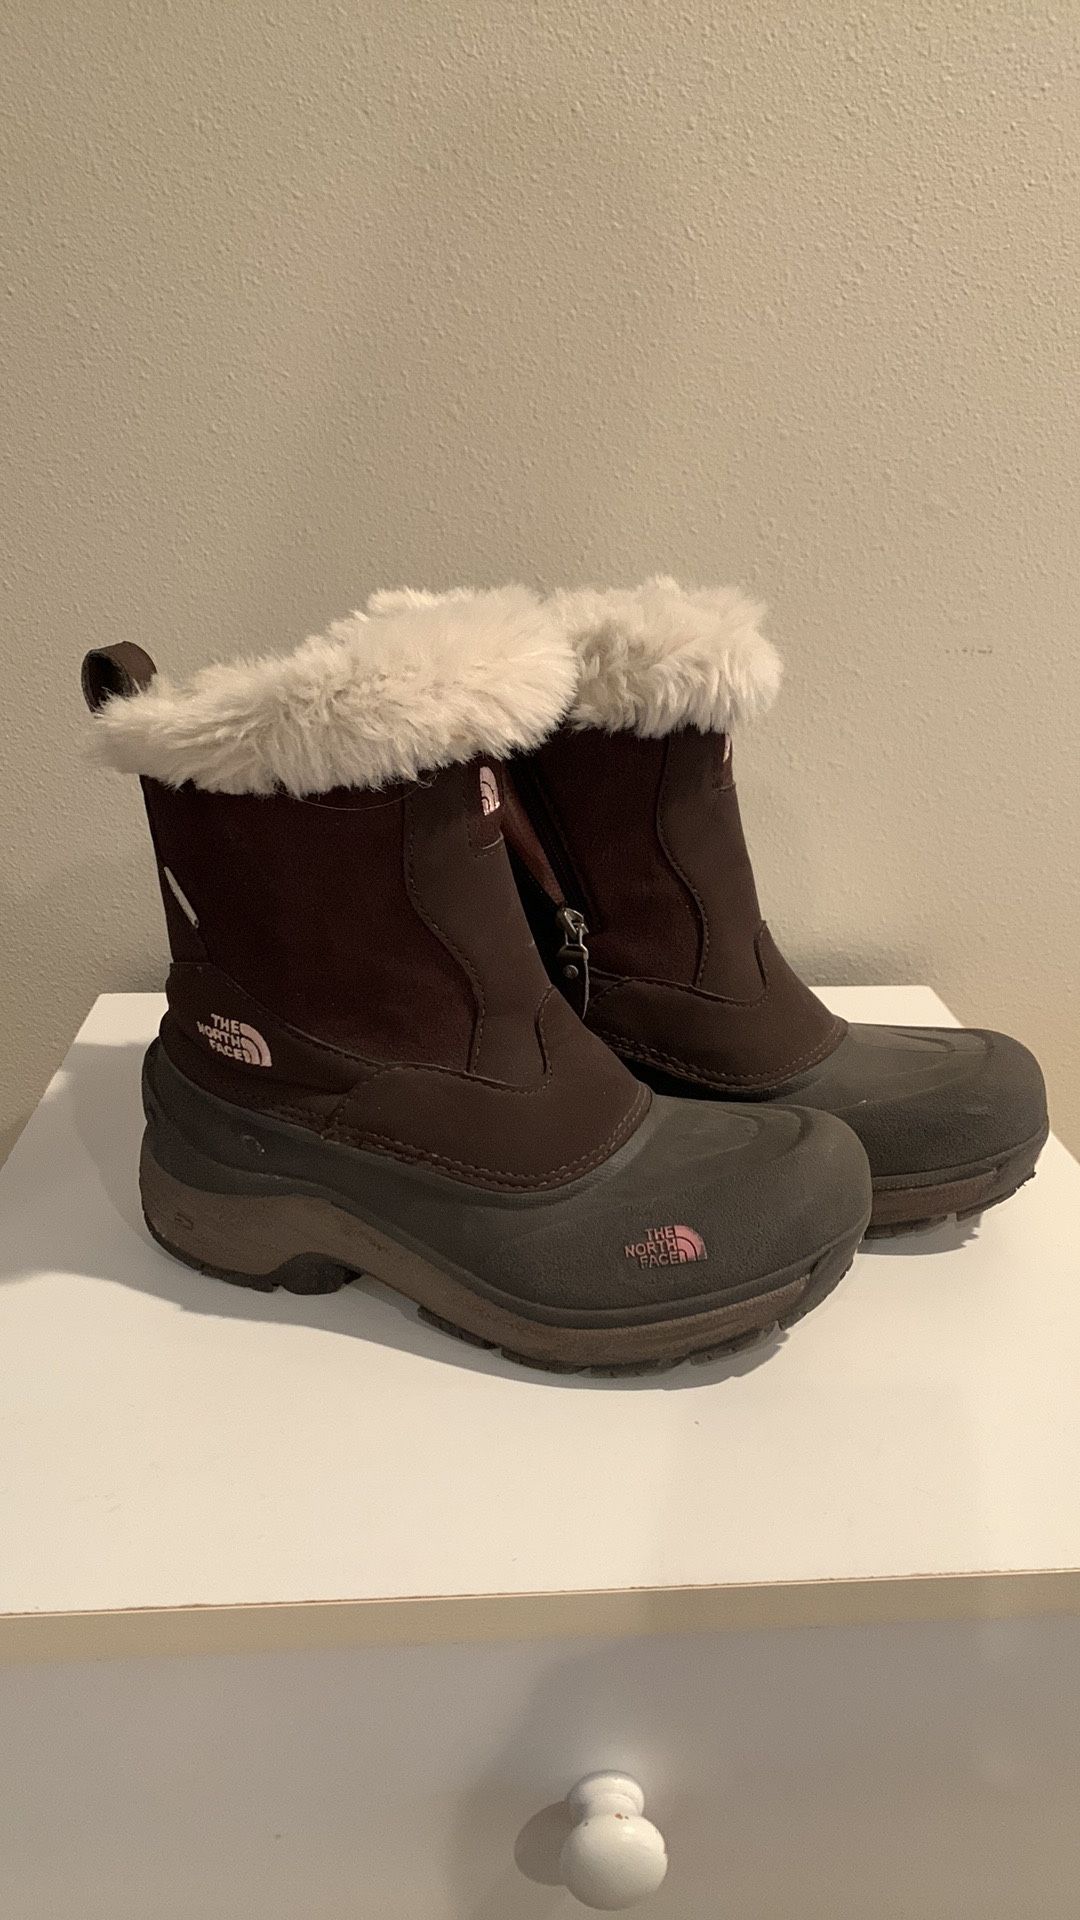 Girls North Face Snow boots Size 5